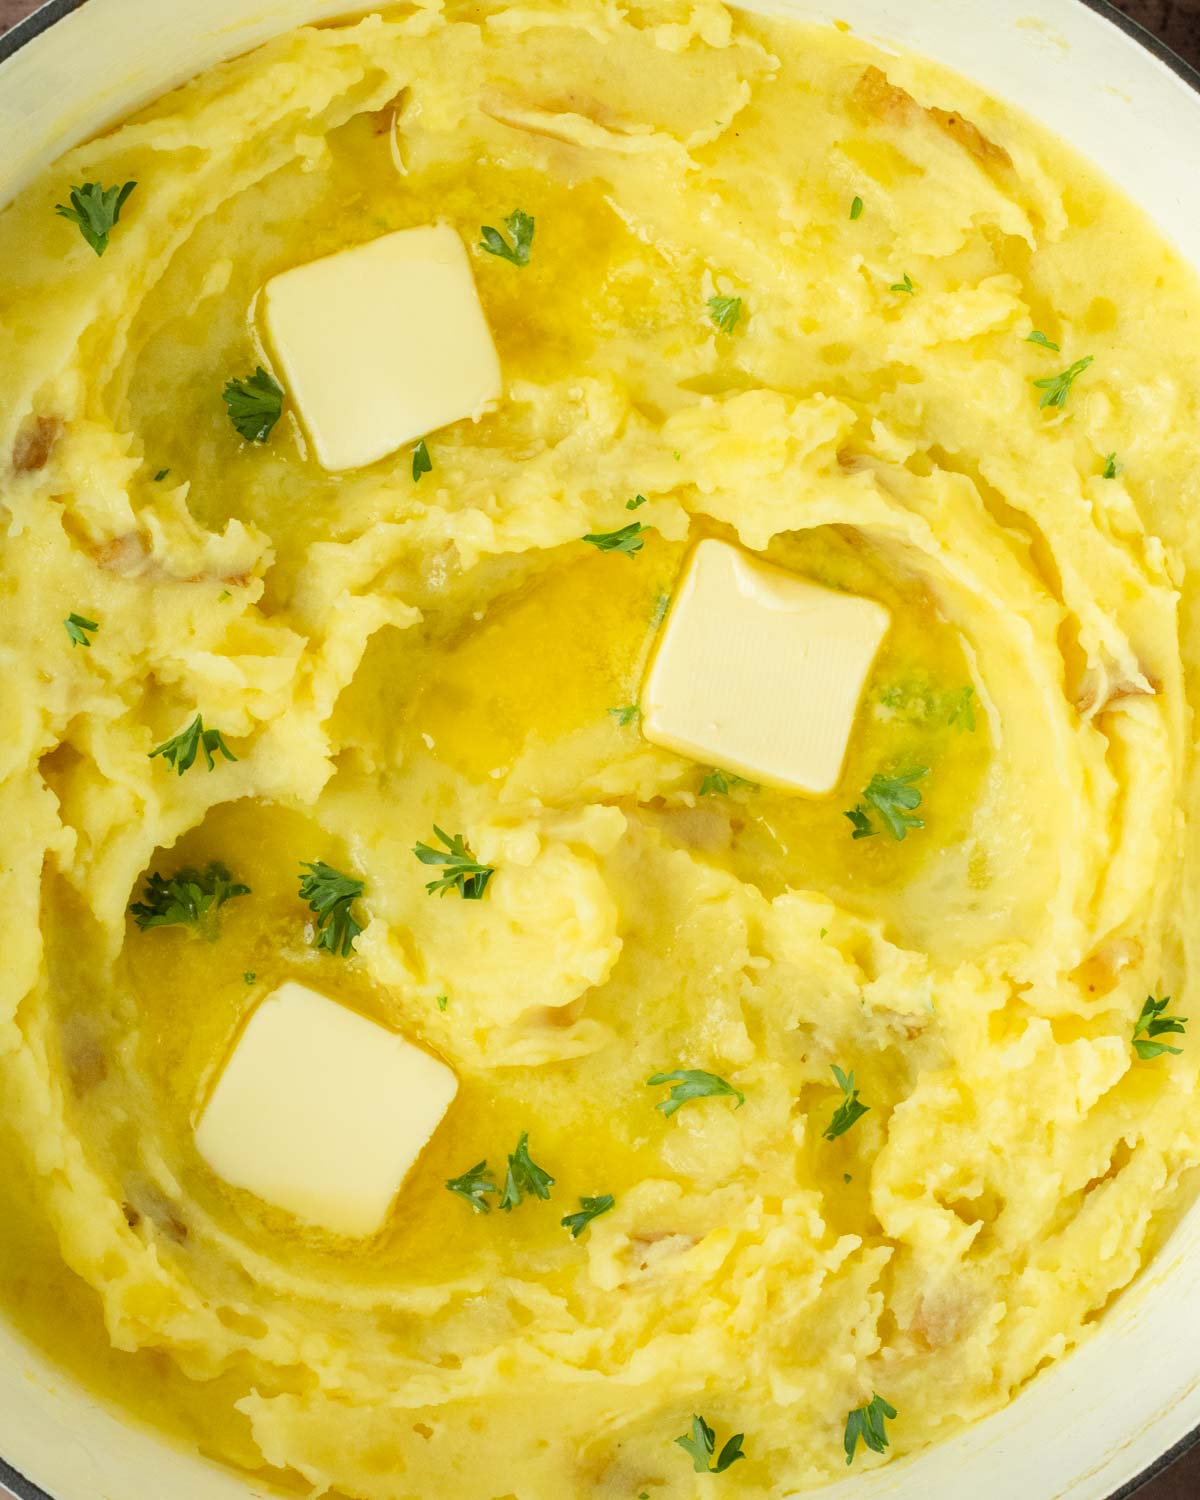 These classic mashed potatoes are a simple, flavorful Yukon Gold mashed potato recipe perfect for an easy side dish for a weeknight dinner and a great holiday side dish recipe.